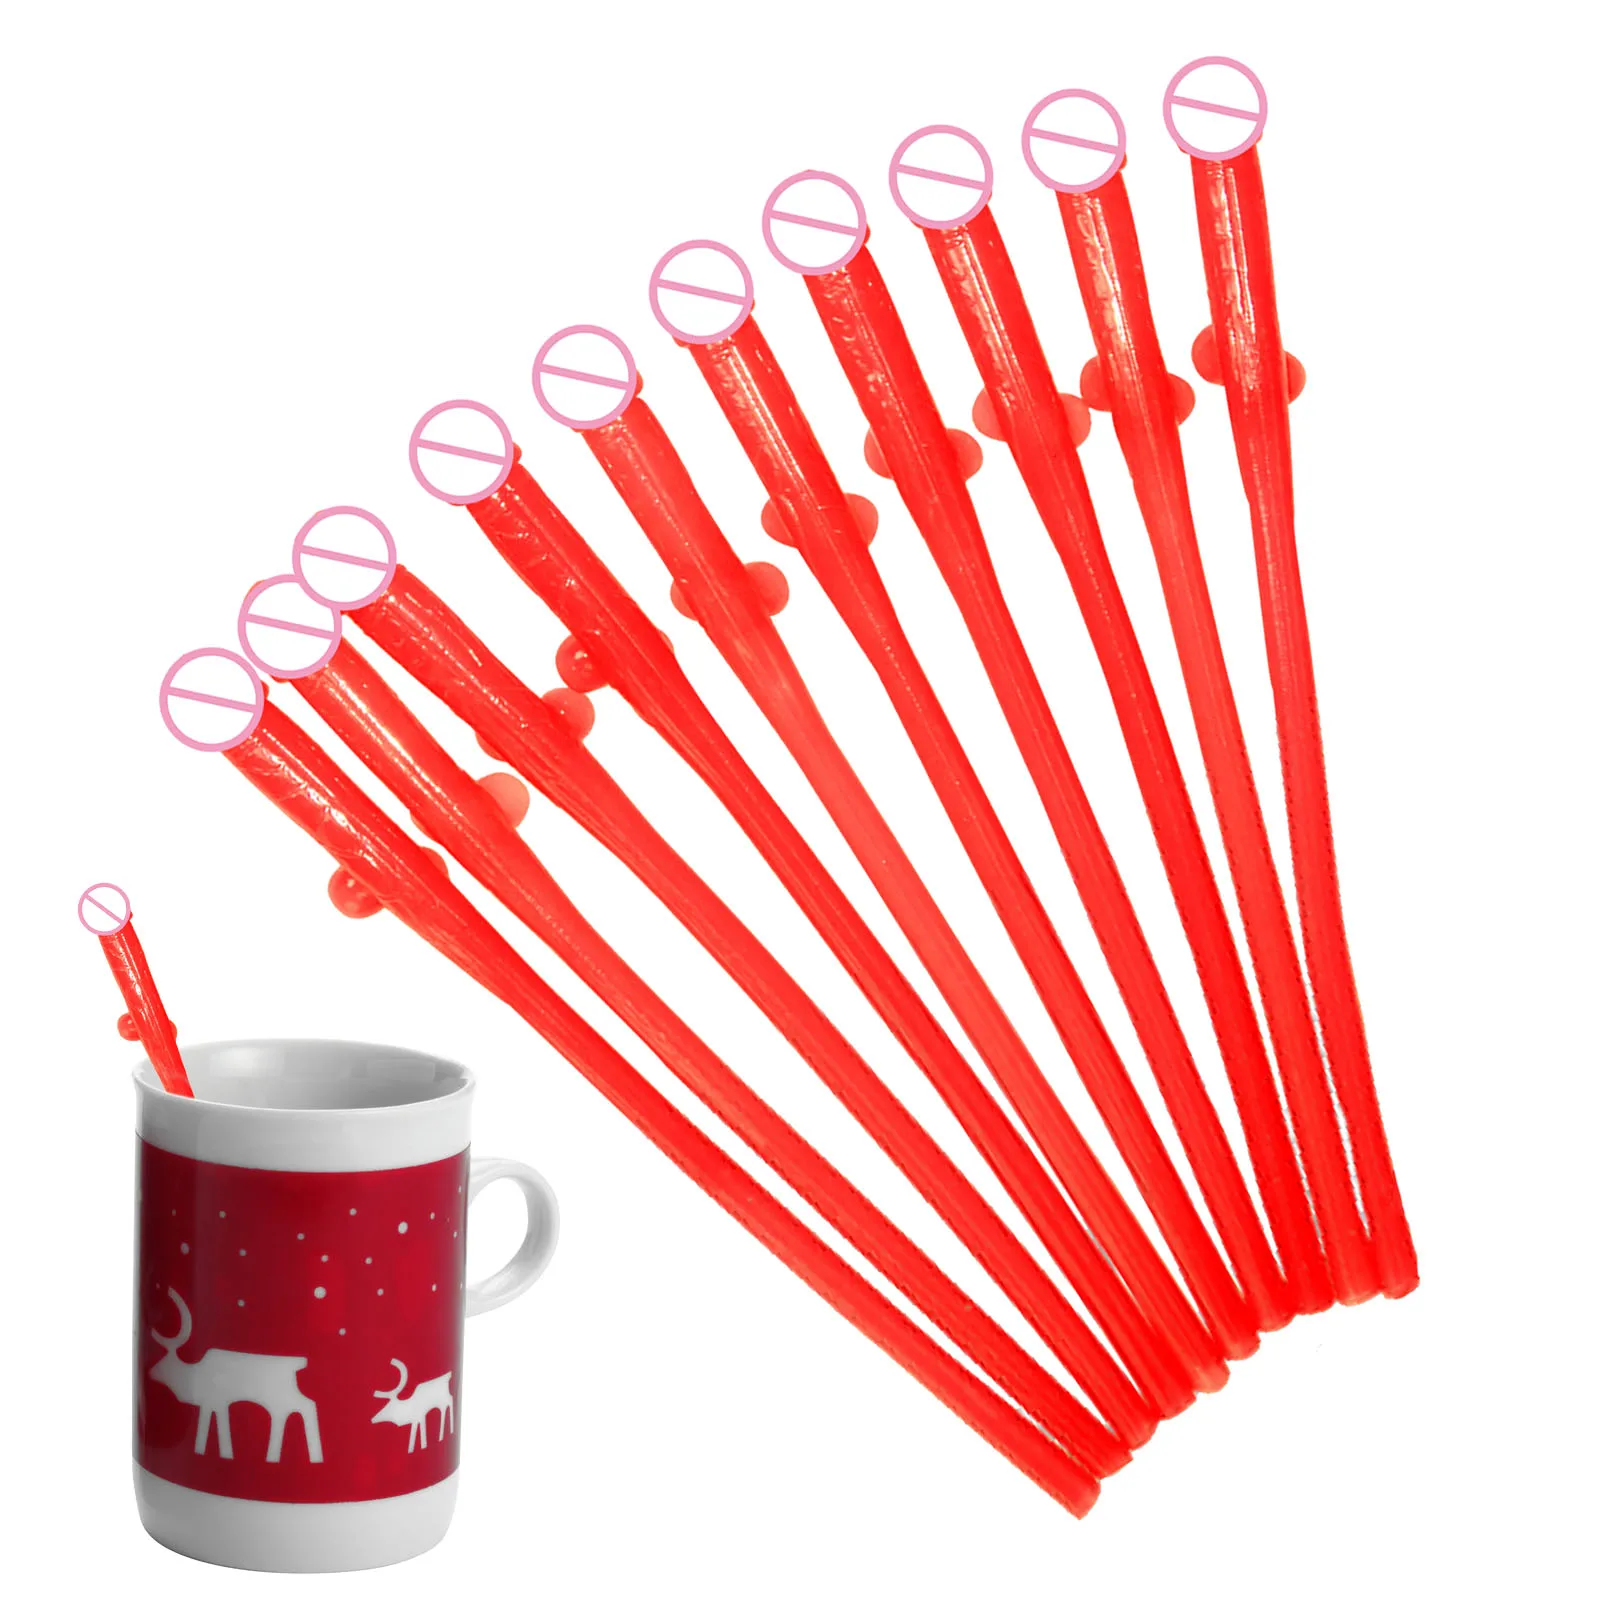 https://ae01.alicdn.com/kf/S16c615676b8942f2bdd17e4eced558e5r/10Pcs-Cuticolor-penis-straws-Bride-Shower-Sexy-Hen-Night-Willy-Drinking-Penis-Novelty-Nude-Straw-for.jpg